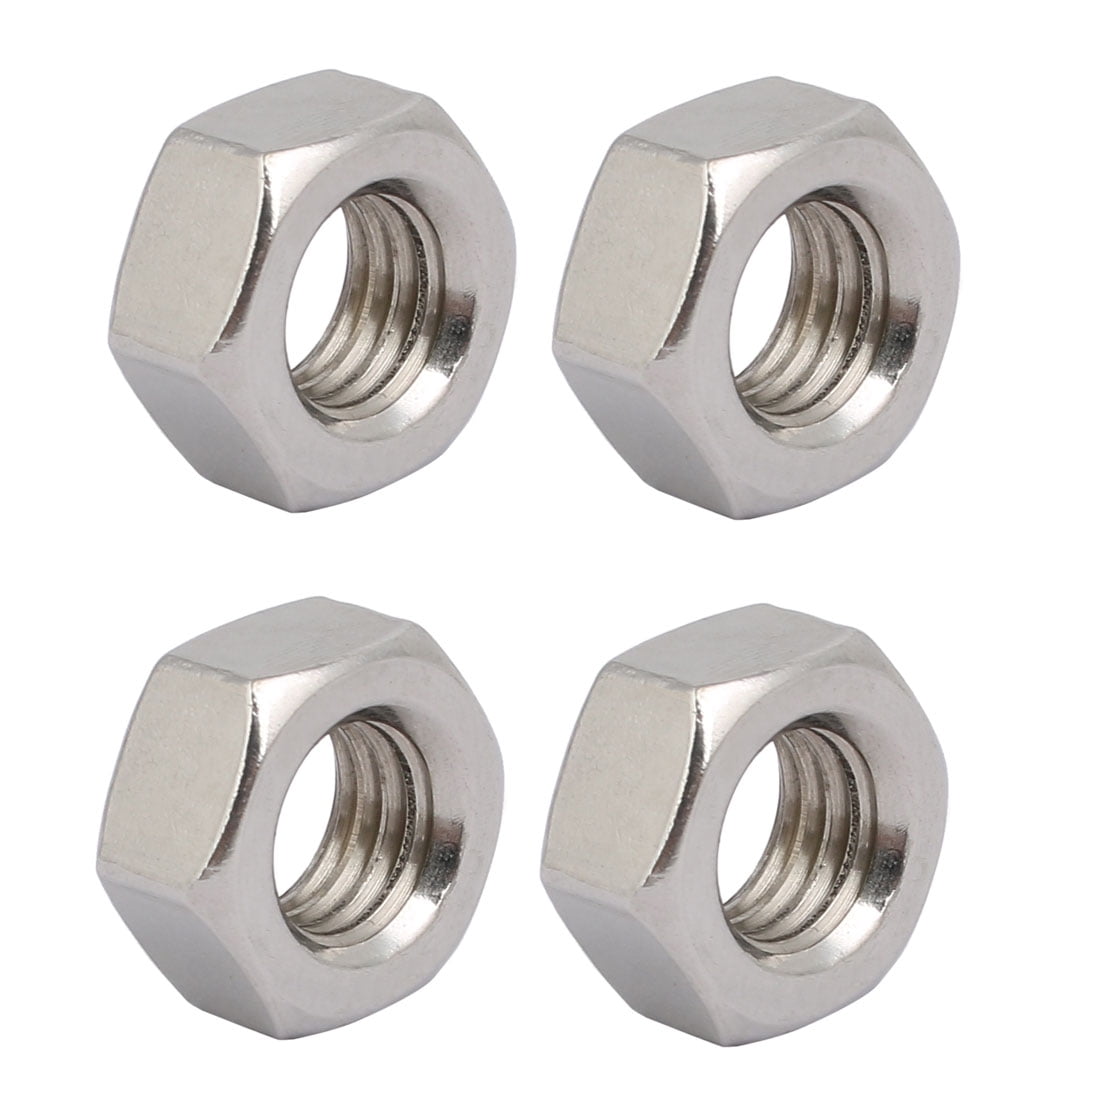 4pcs M6 x 1 mm Pitch Stainless Steel Left Hand Thread Hex Nut Metric 